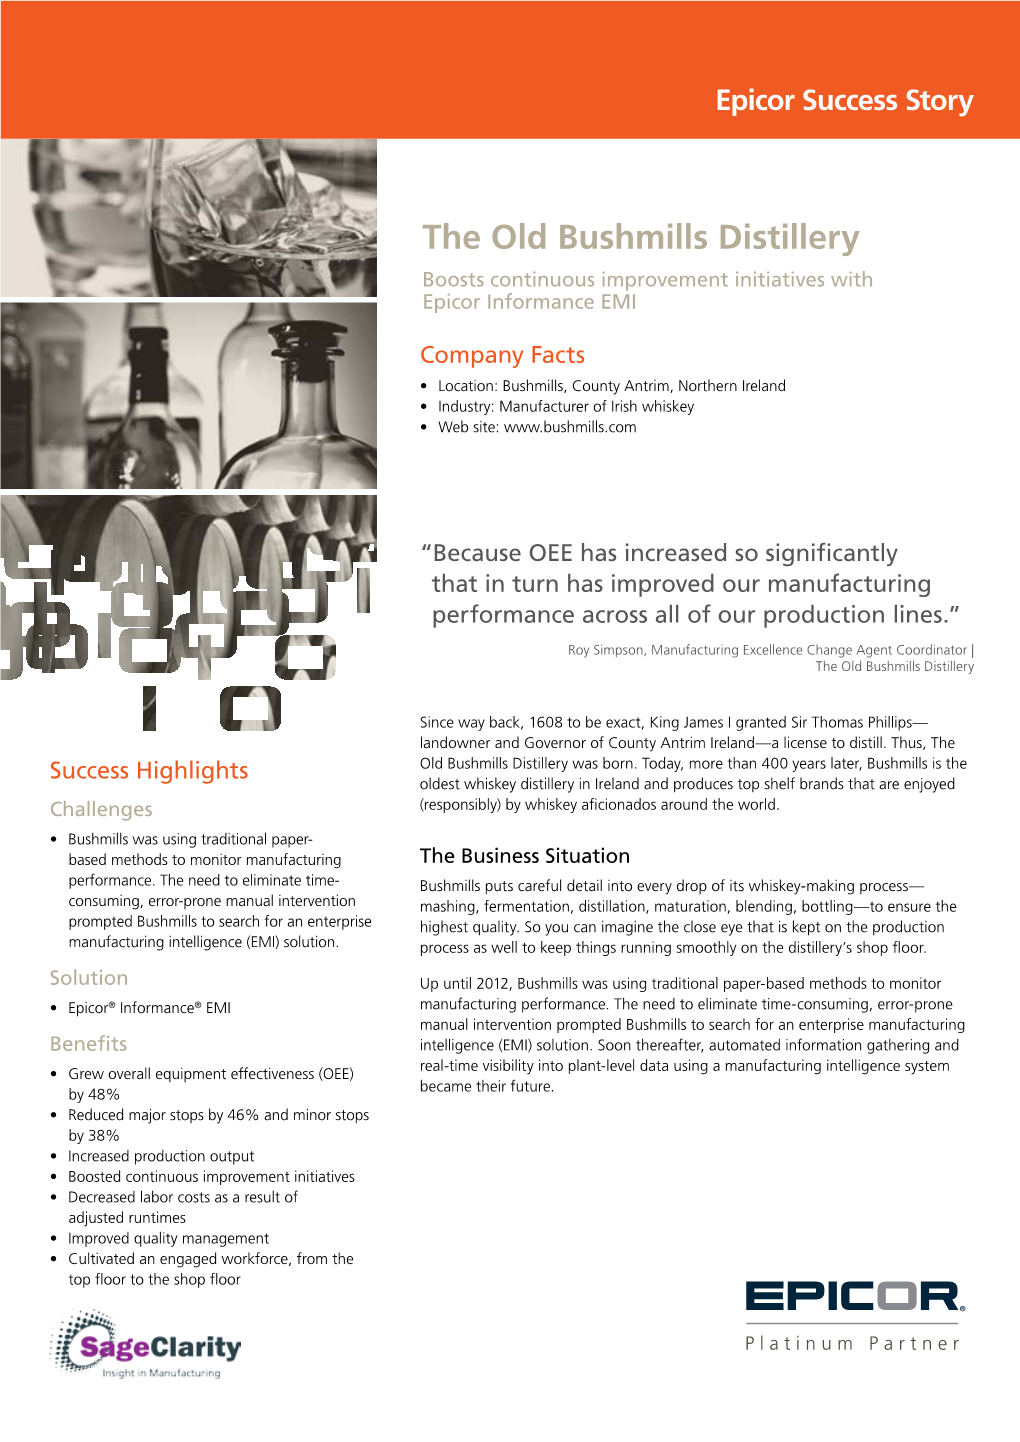 The Old Bushmills Distillery Boosts Continuous Improvement Initiatives with Epicor Informance EMI